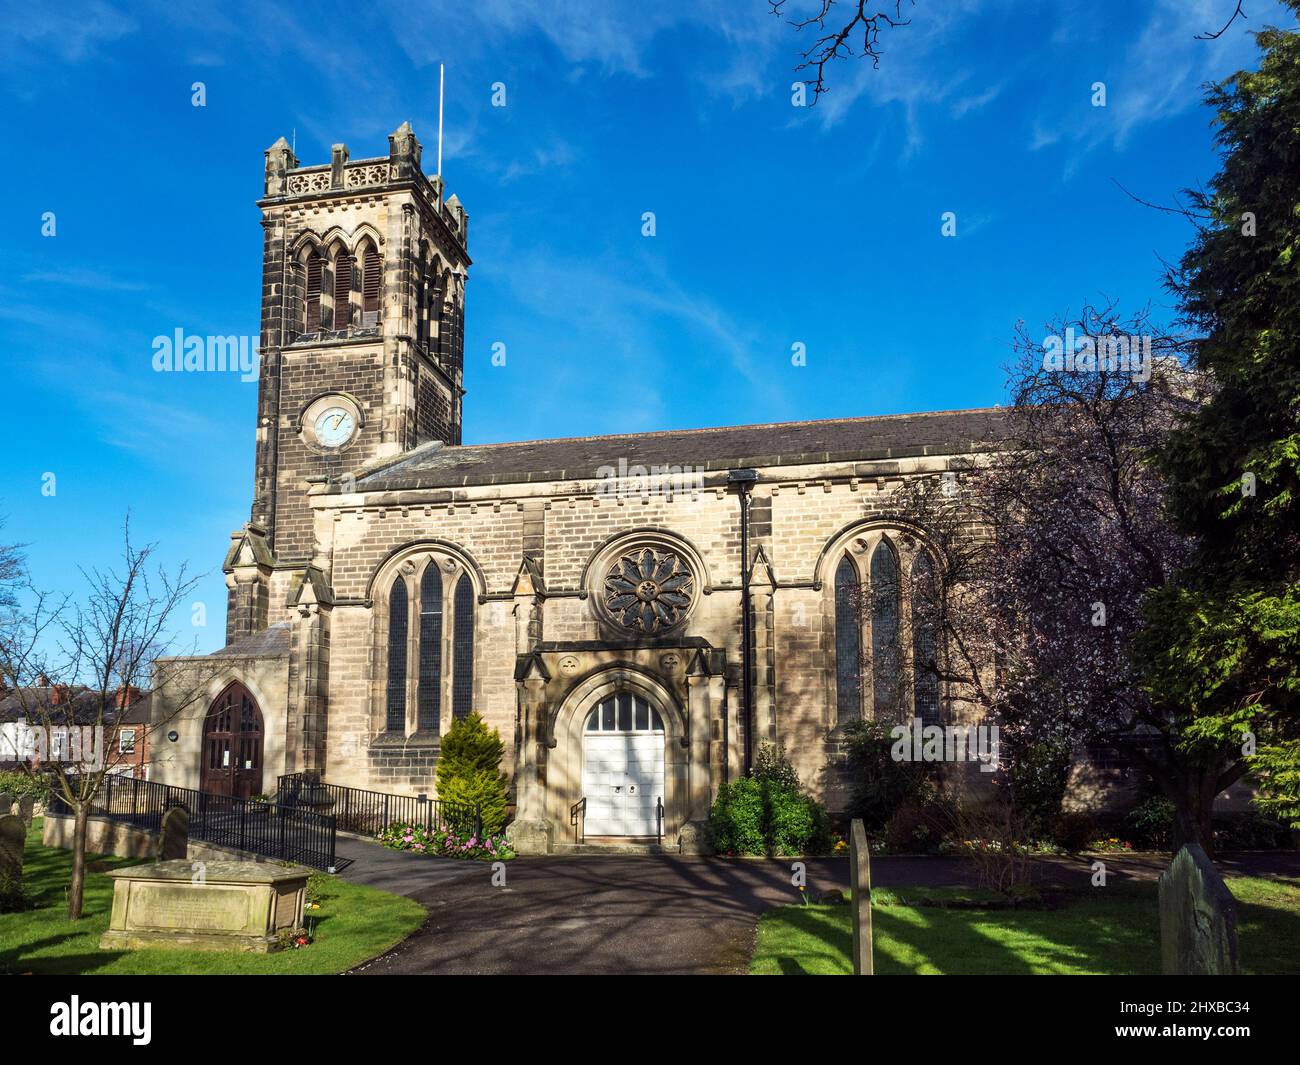 La Chiesa di St James a Wetherby West Yorkshire Inghilterra Foto Stock